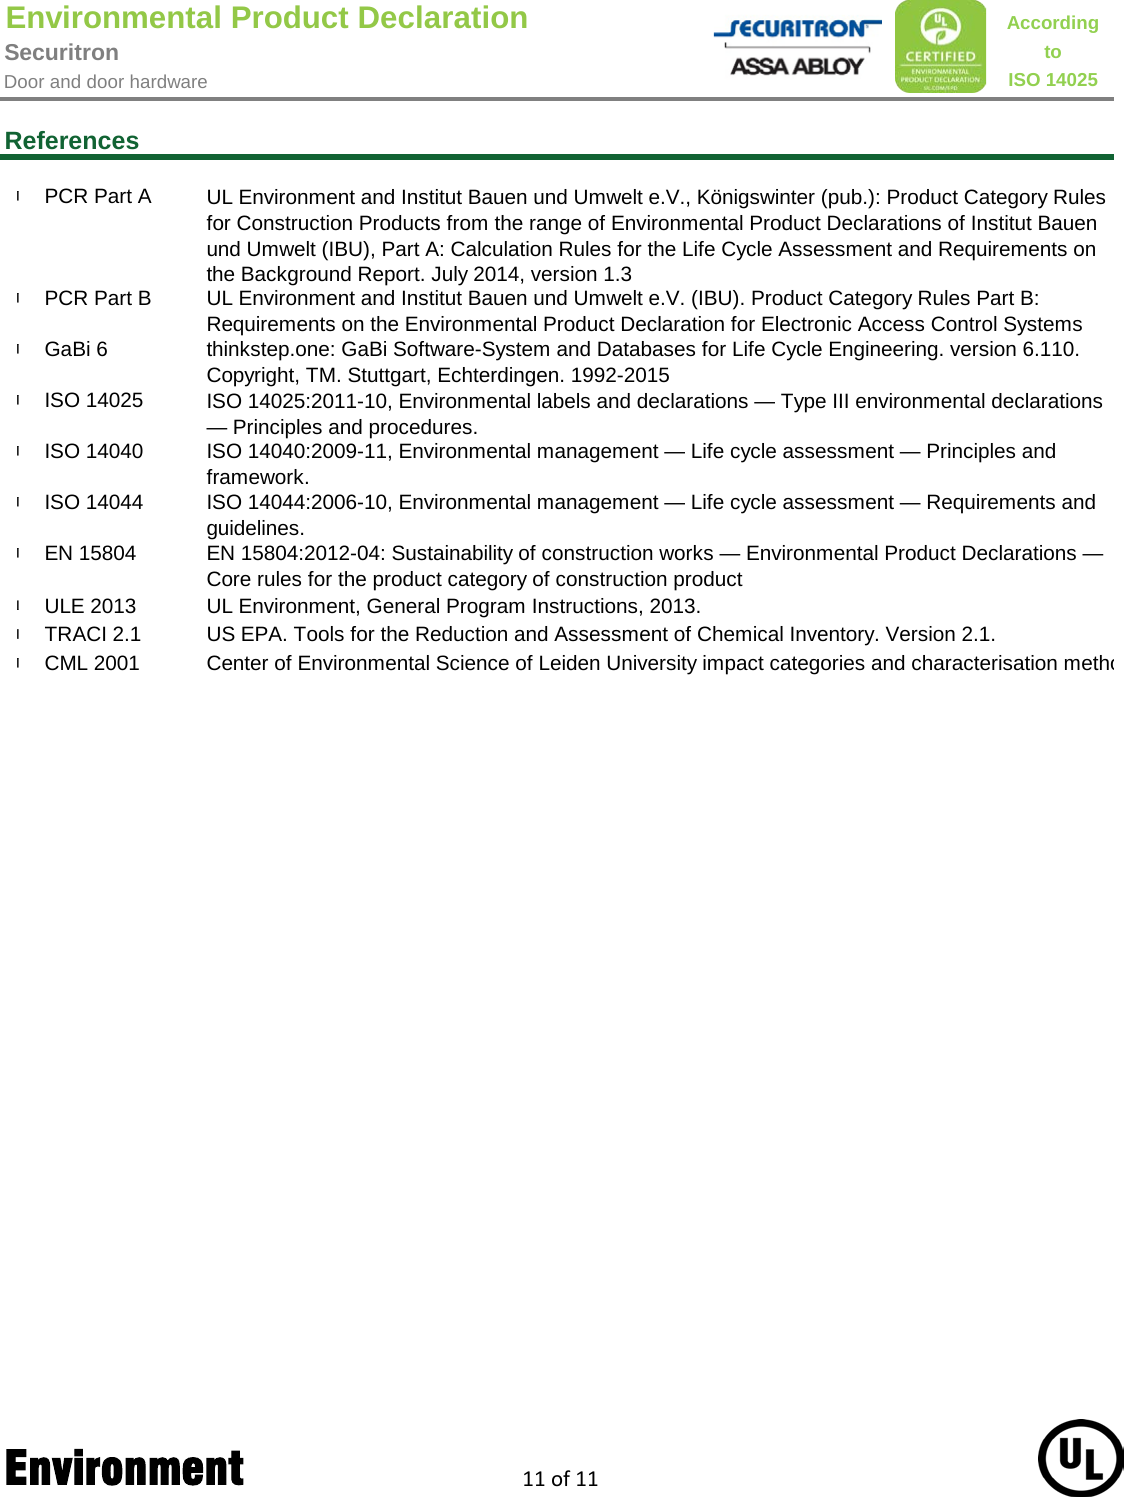 Page 11 of 11 - Securitron  Eco Power Supply - Environmental Product Declaration (EPD) EPD 10.21.16